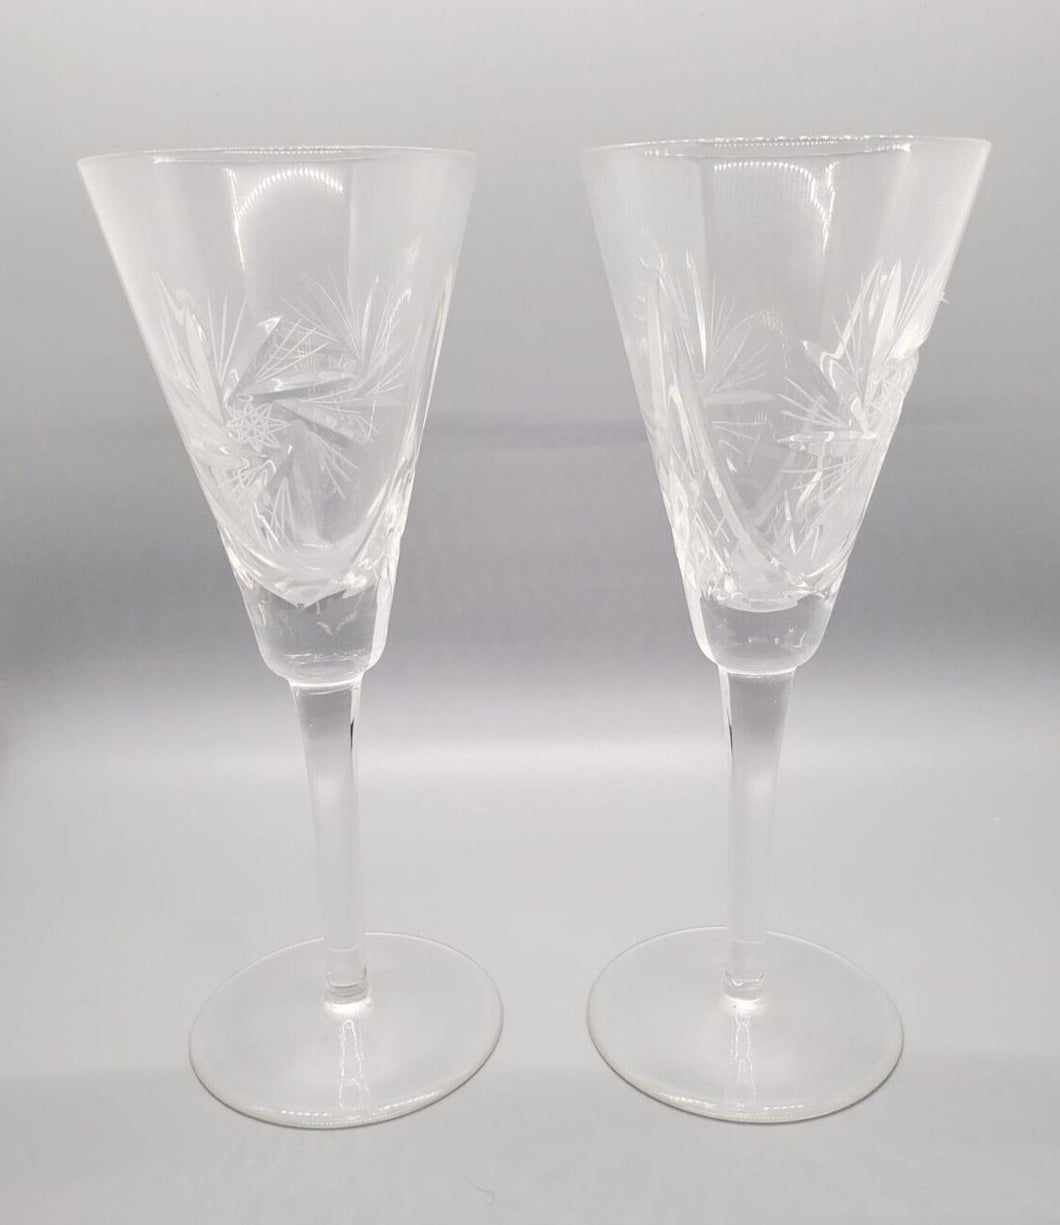 A Pair of Decorative Crystal White Wine Glasses, Cut Design